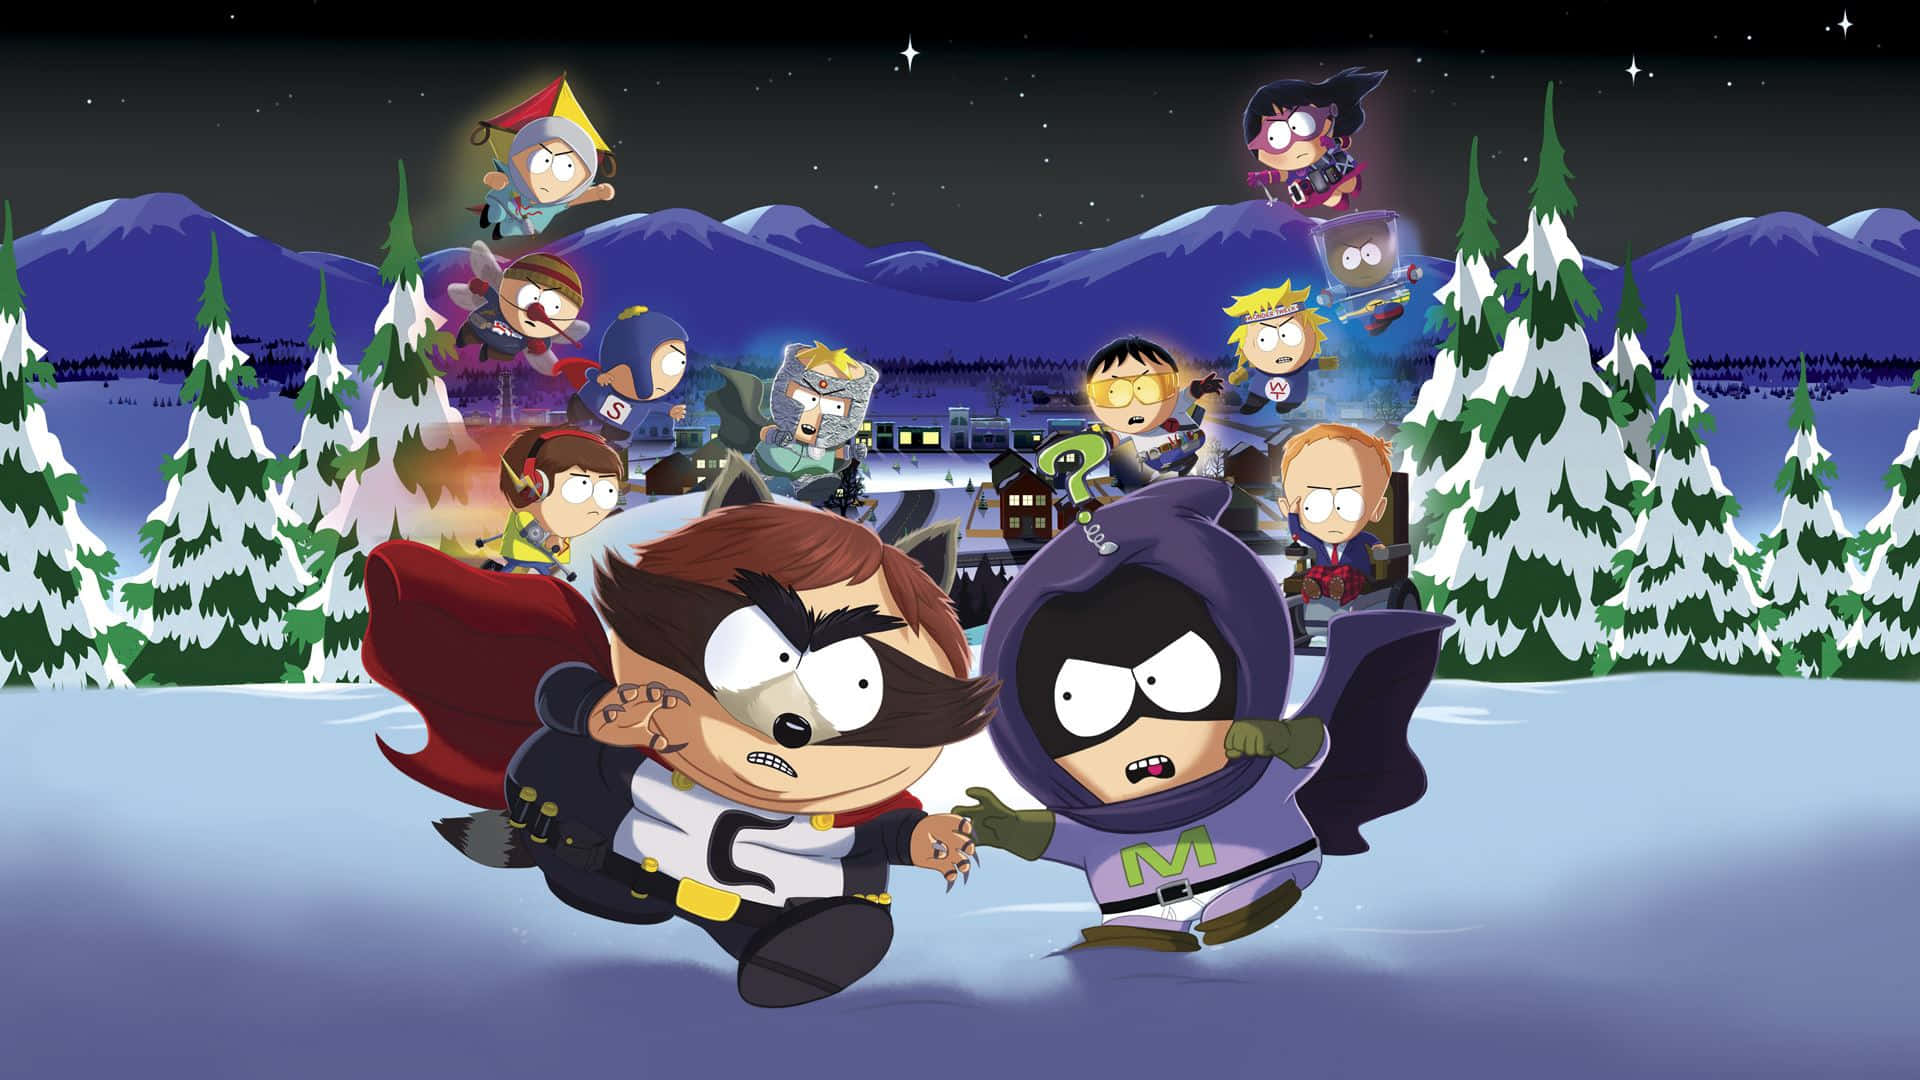 Follow the main characters of South Park in their everyday adventures.